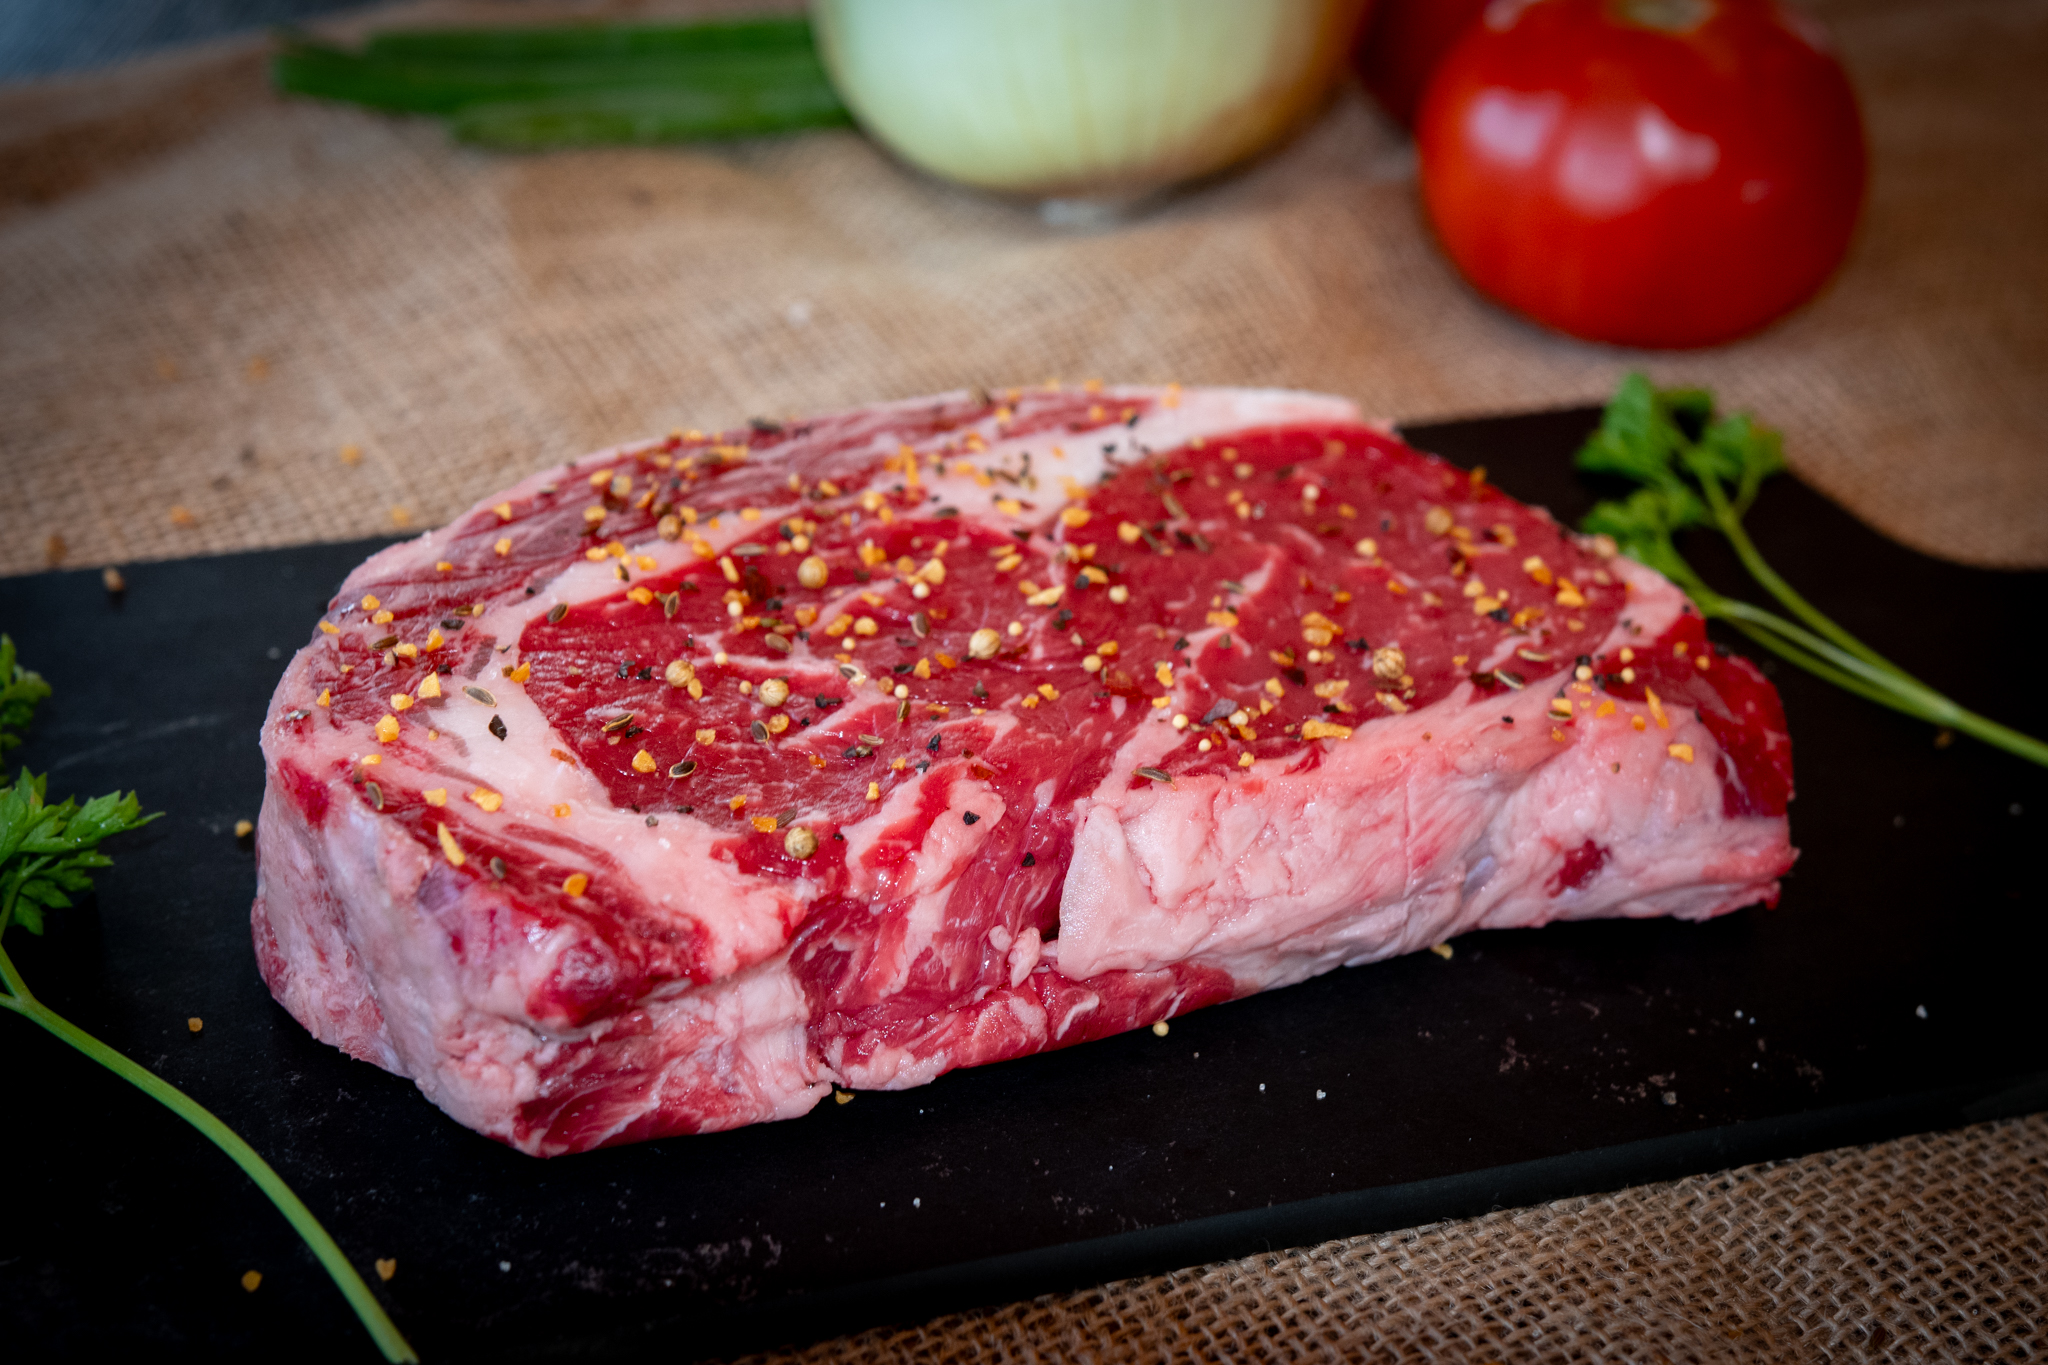 Ebert Grown USDA graded Ribeye Steak available at Salmon's Meat Products and online for shipping